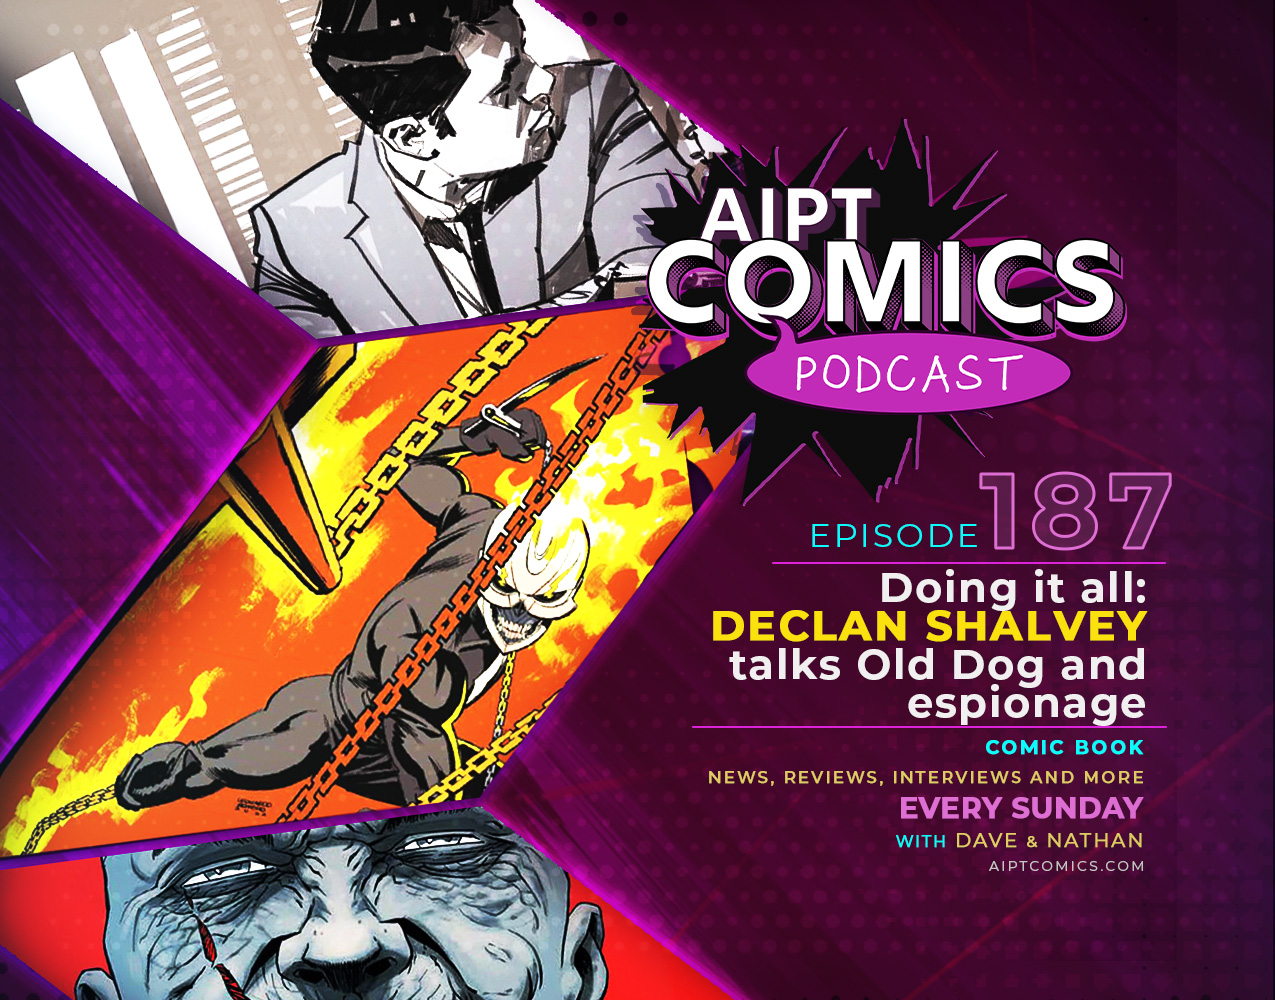 AIPT Comics Podcast Episode 187: Doing it all: Declan Shalvey talks 'Old Dog' and espionage